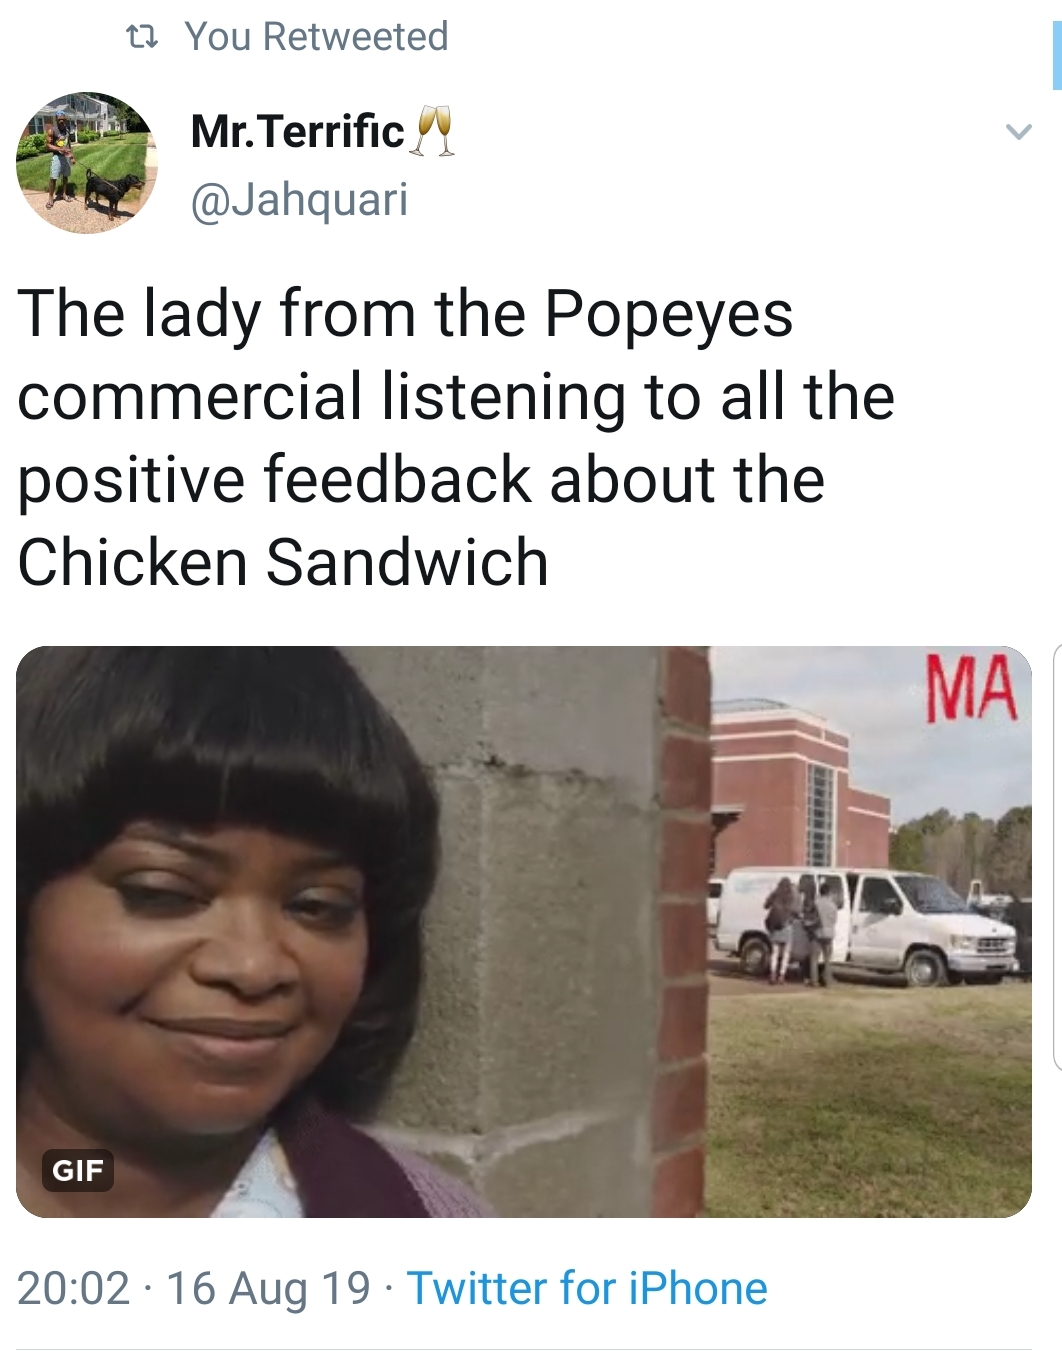 media - t1 You Retweeted Mr. Terrific The lady from the Popeyes commercial listening to all the positive feedback about the Chicken Sandwich Gif . 16 Aug 19. Twitter for iPhone